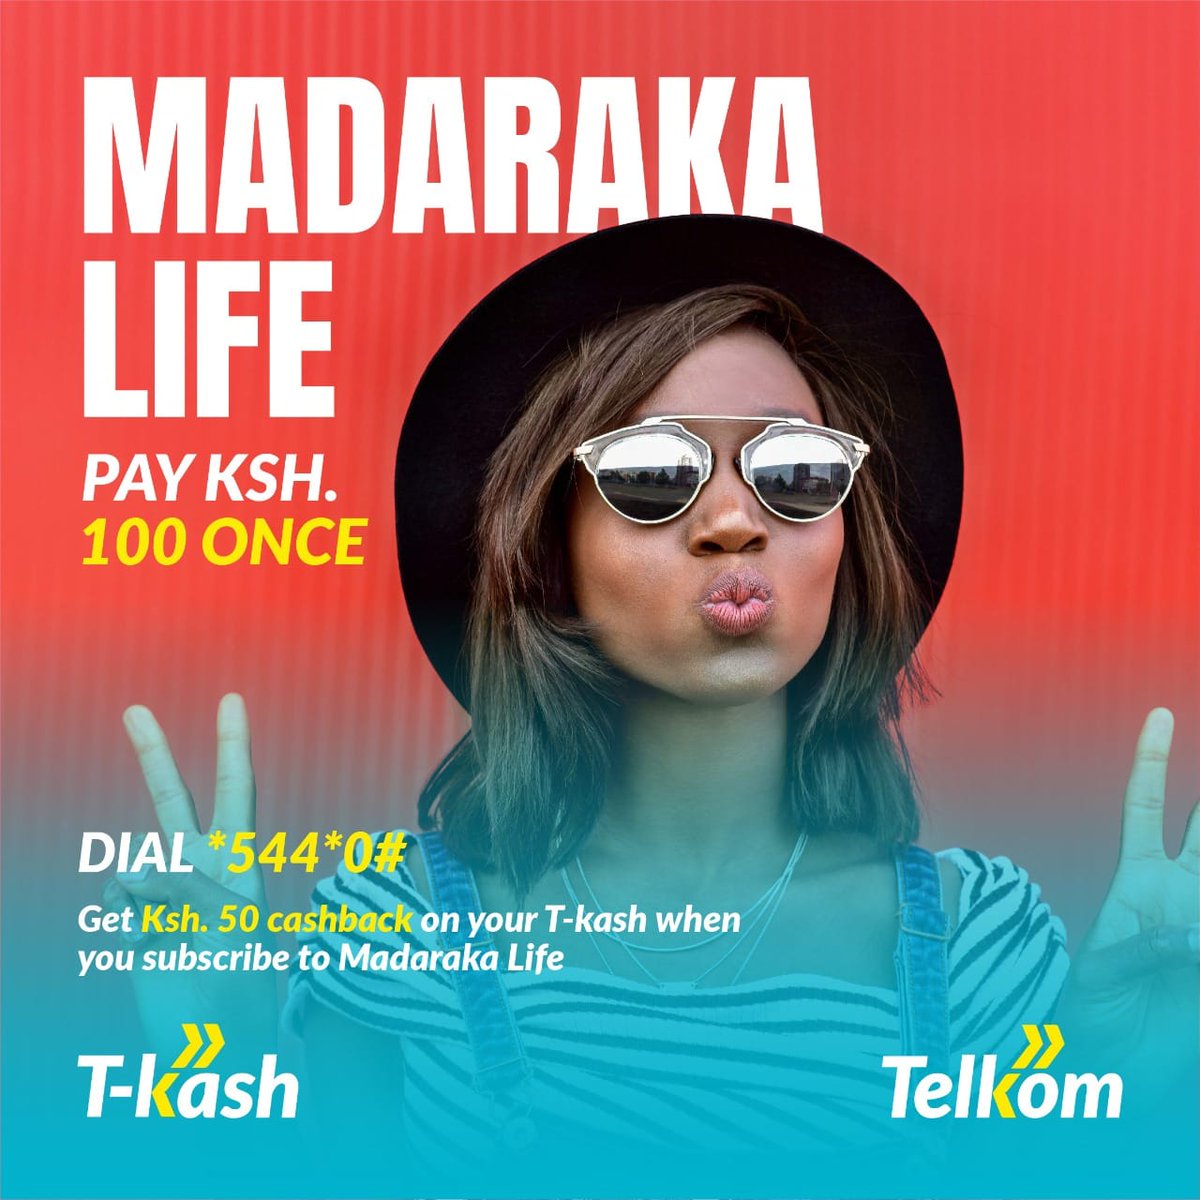 Working from home? @TelkomKenya presents #MadarakaLife offer. All you need to do is visit a Telkom shop, register and activate T-kash. Top up your line with 100 bob or dial *444*58# #FreedomForLife @TelkomKenya